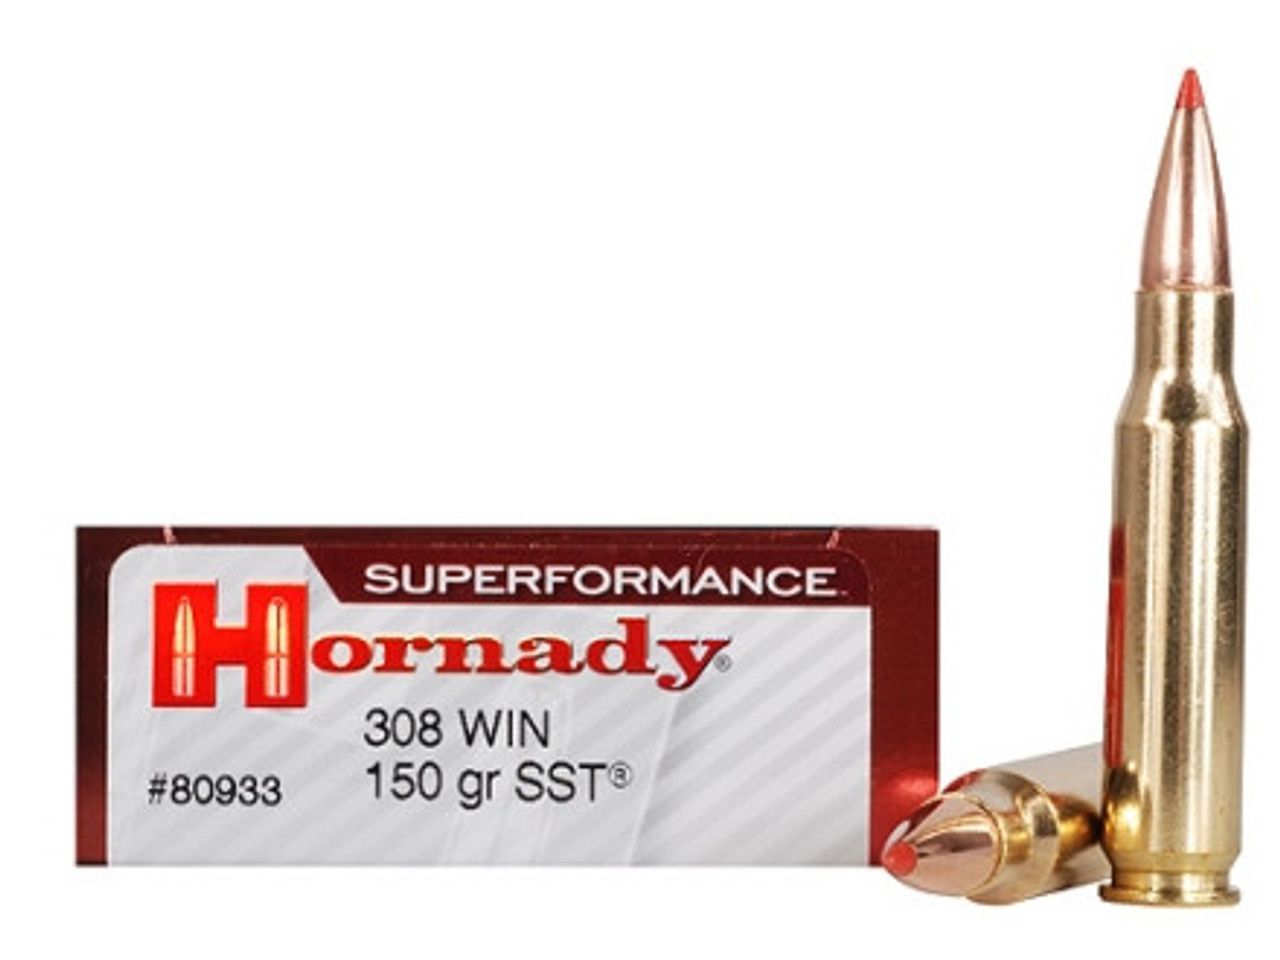 Hornady Superformance Rifle Ammo 308 WIN, SST, 150 Grains, 3000 fps, 20 Rnds